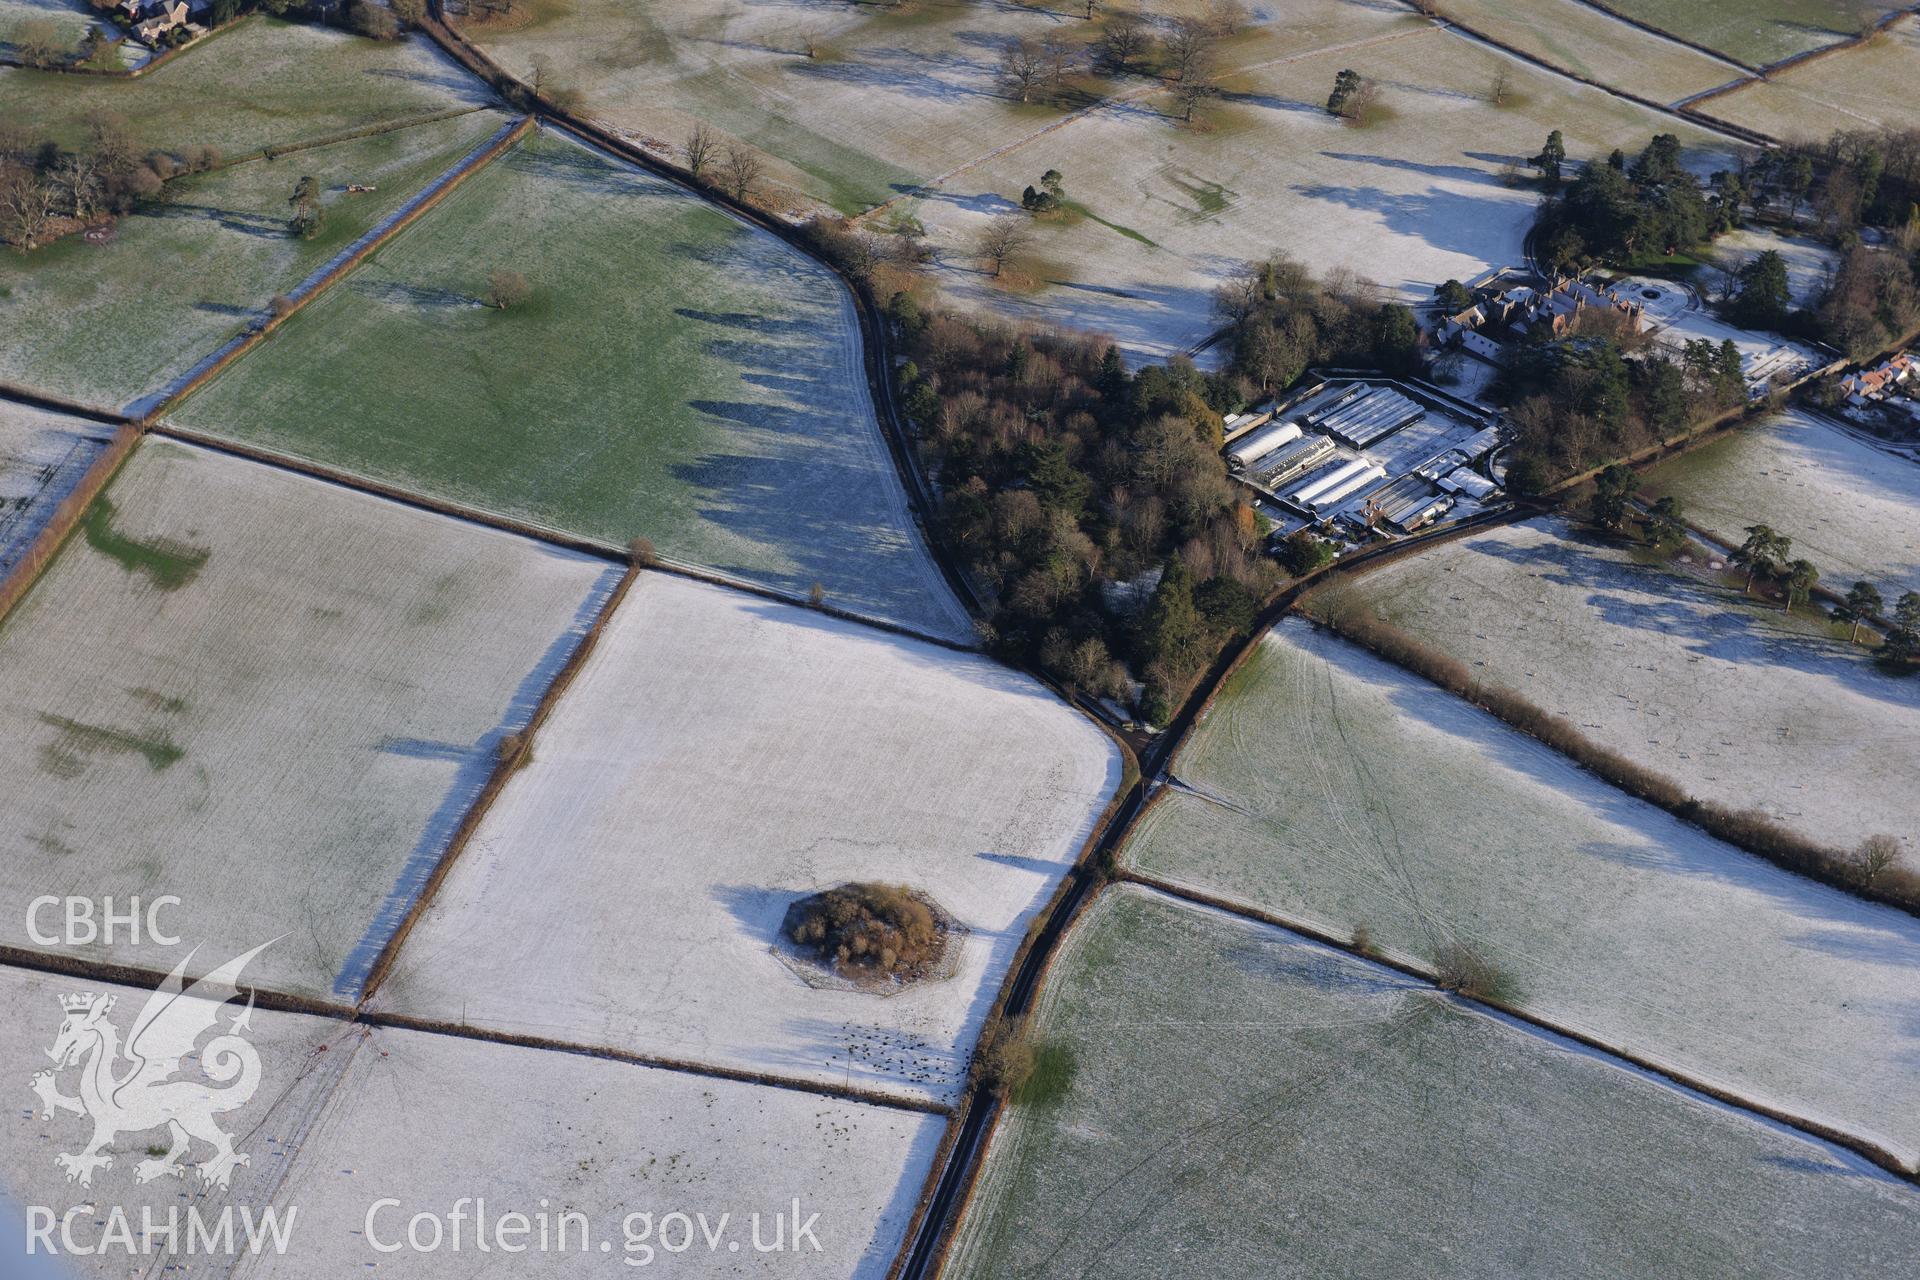 Treberfydd mansion and garden, and Twmpan Motte, Llangors, south east of Brecon. Oblique aerial photograph taken during the Royal Commission?s programme of archaeological aerial reconnaissance by Toby Driver on 15th January 2013.